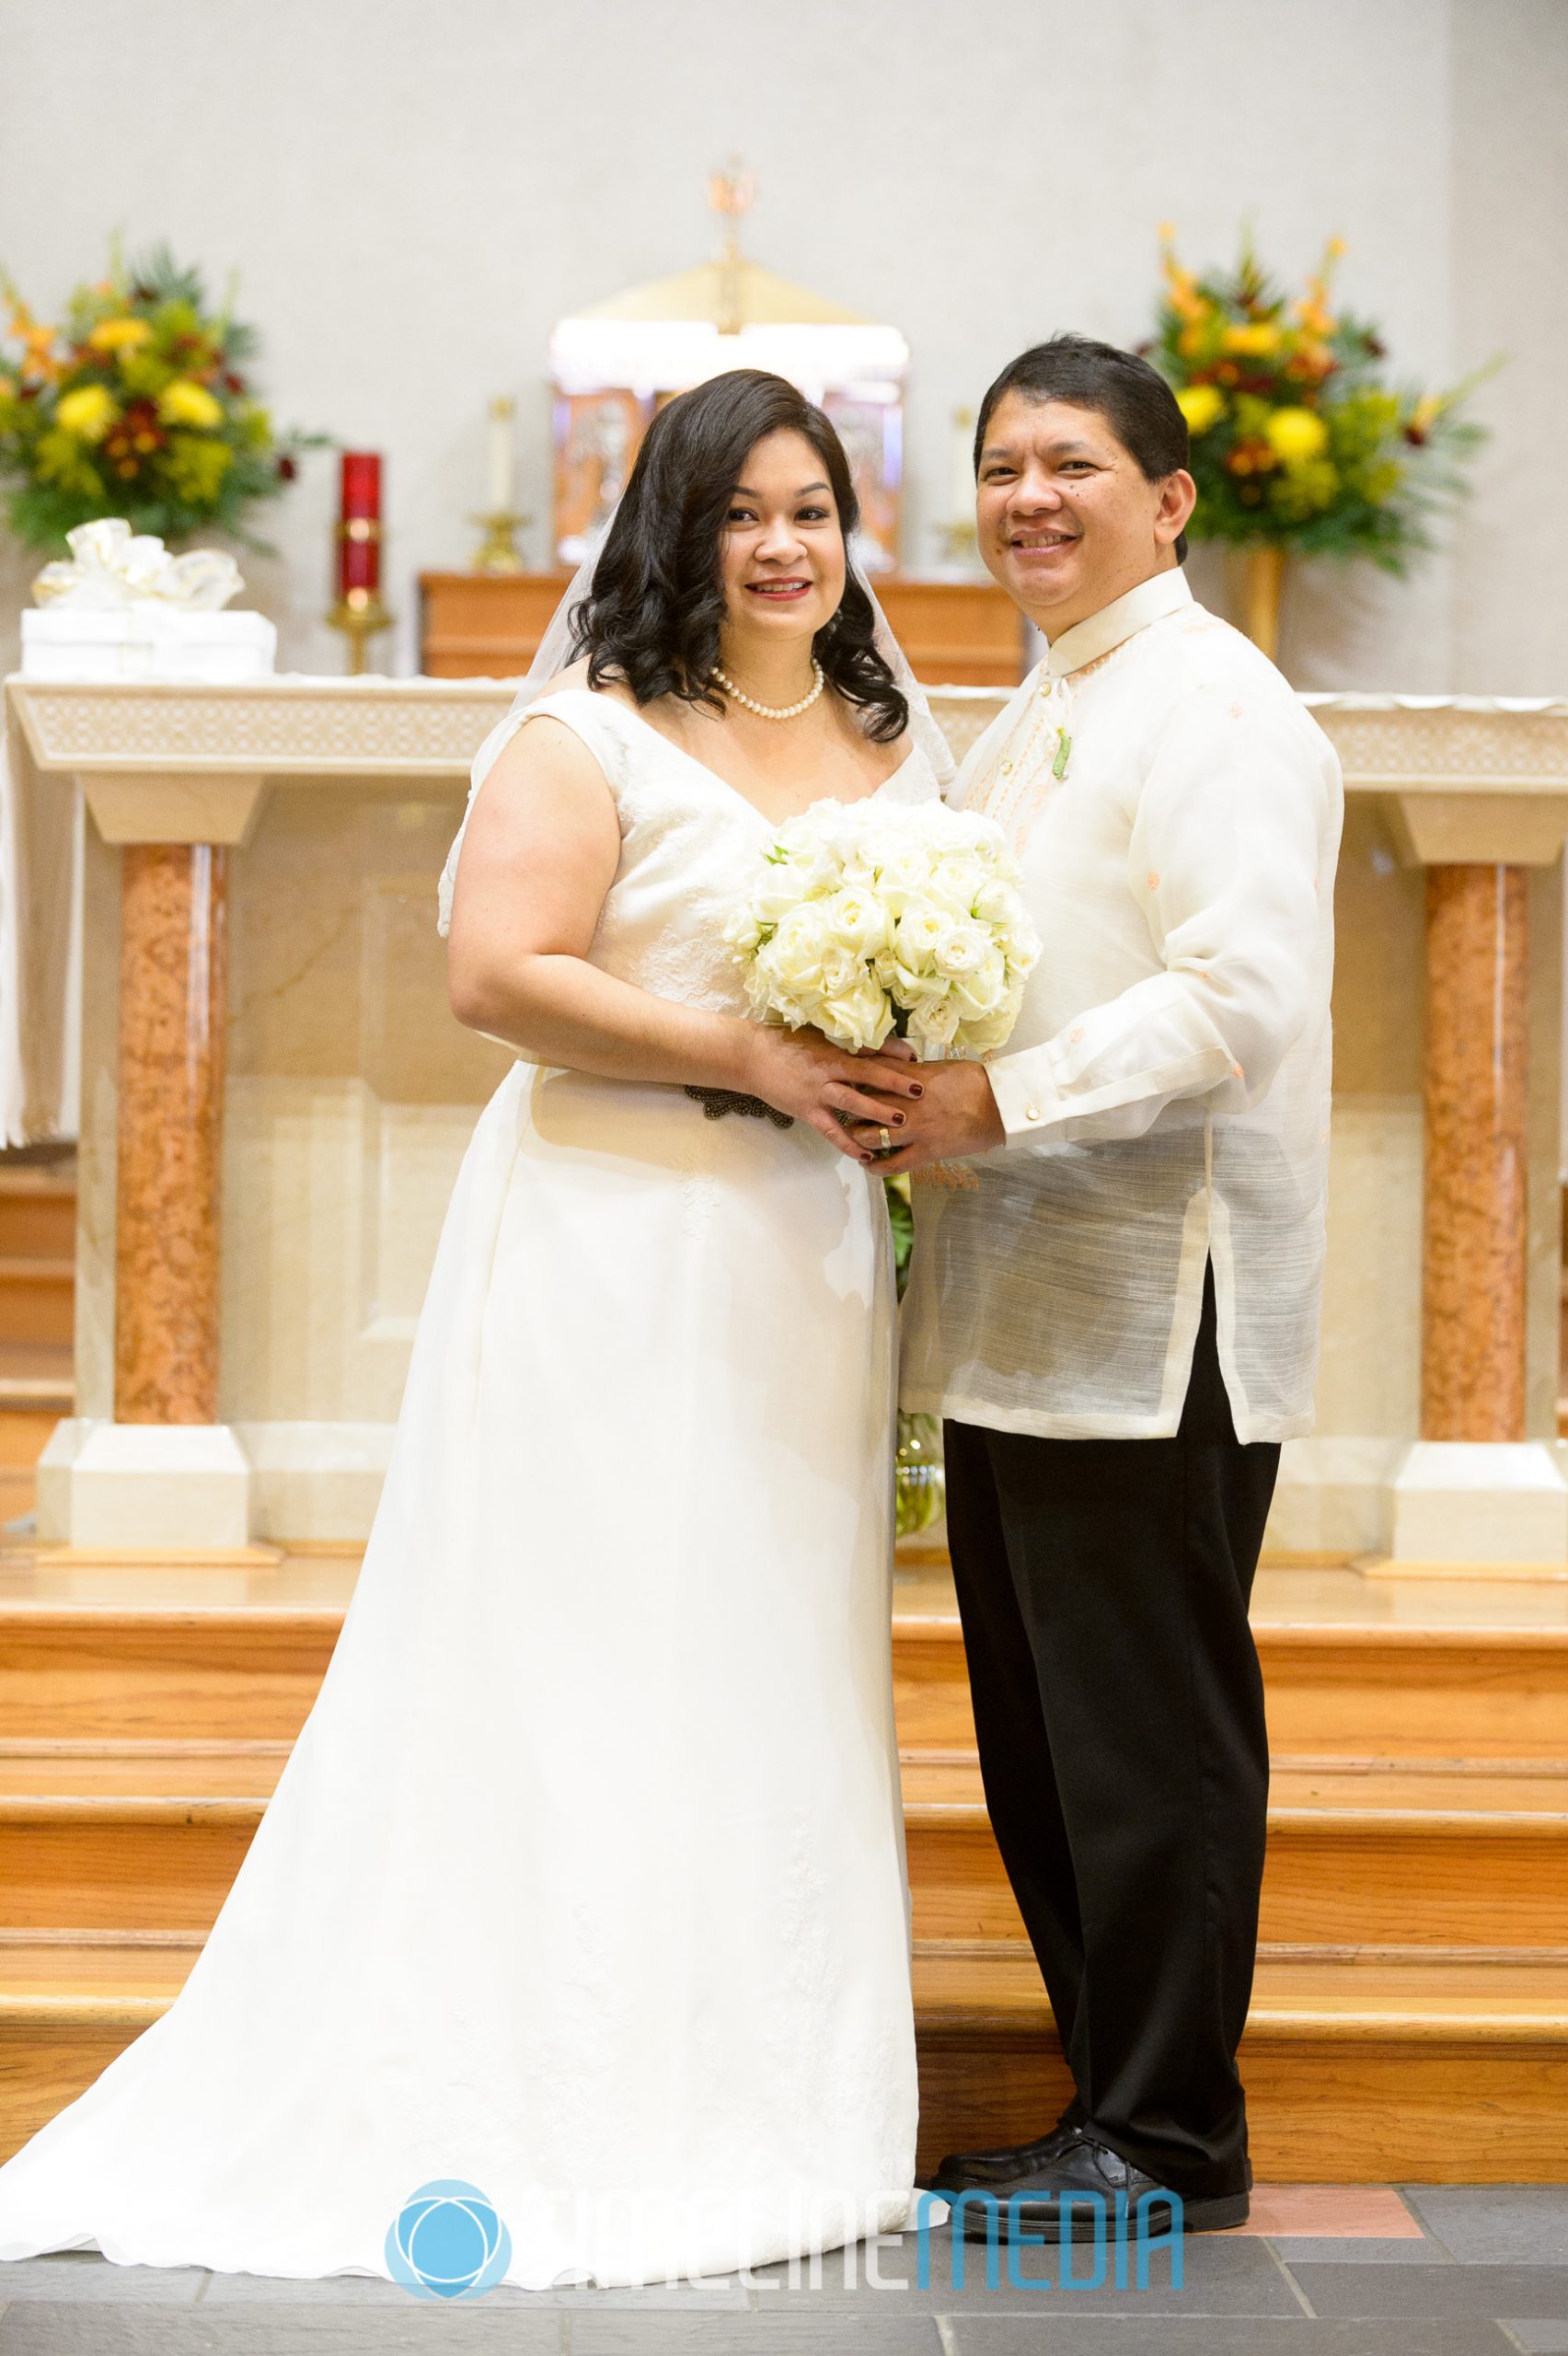 Jo and Claro's Wedding at Our Lady of Angels Church in Woodbridge, VA ©TimeLine Media